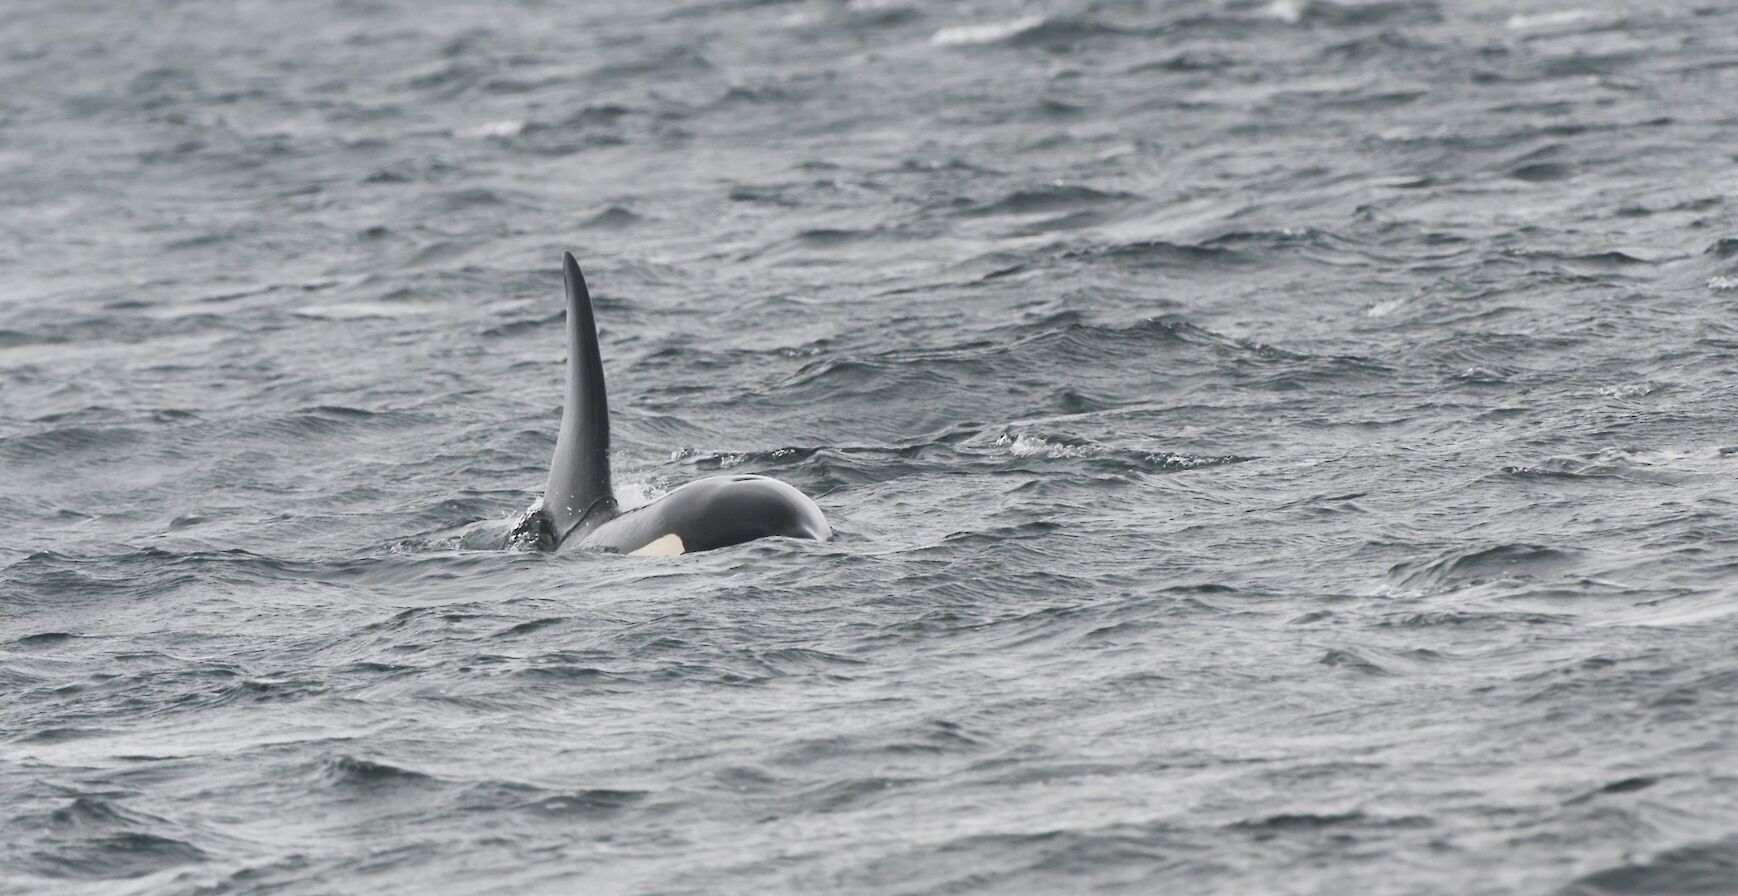 Orca in Orkney waters - image by Raymond Besant